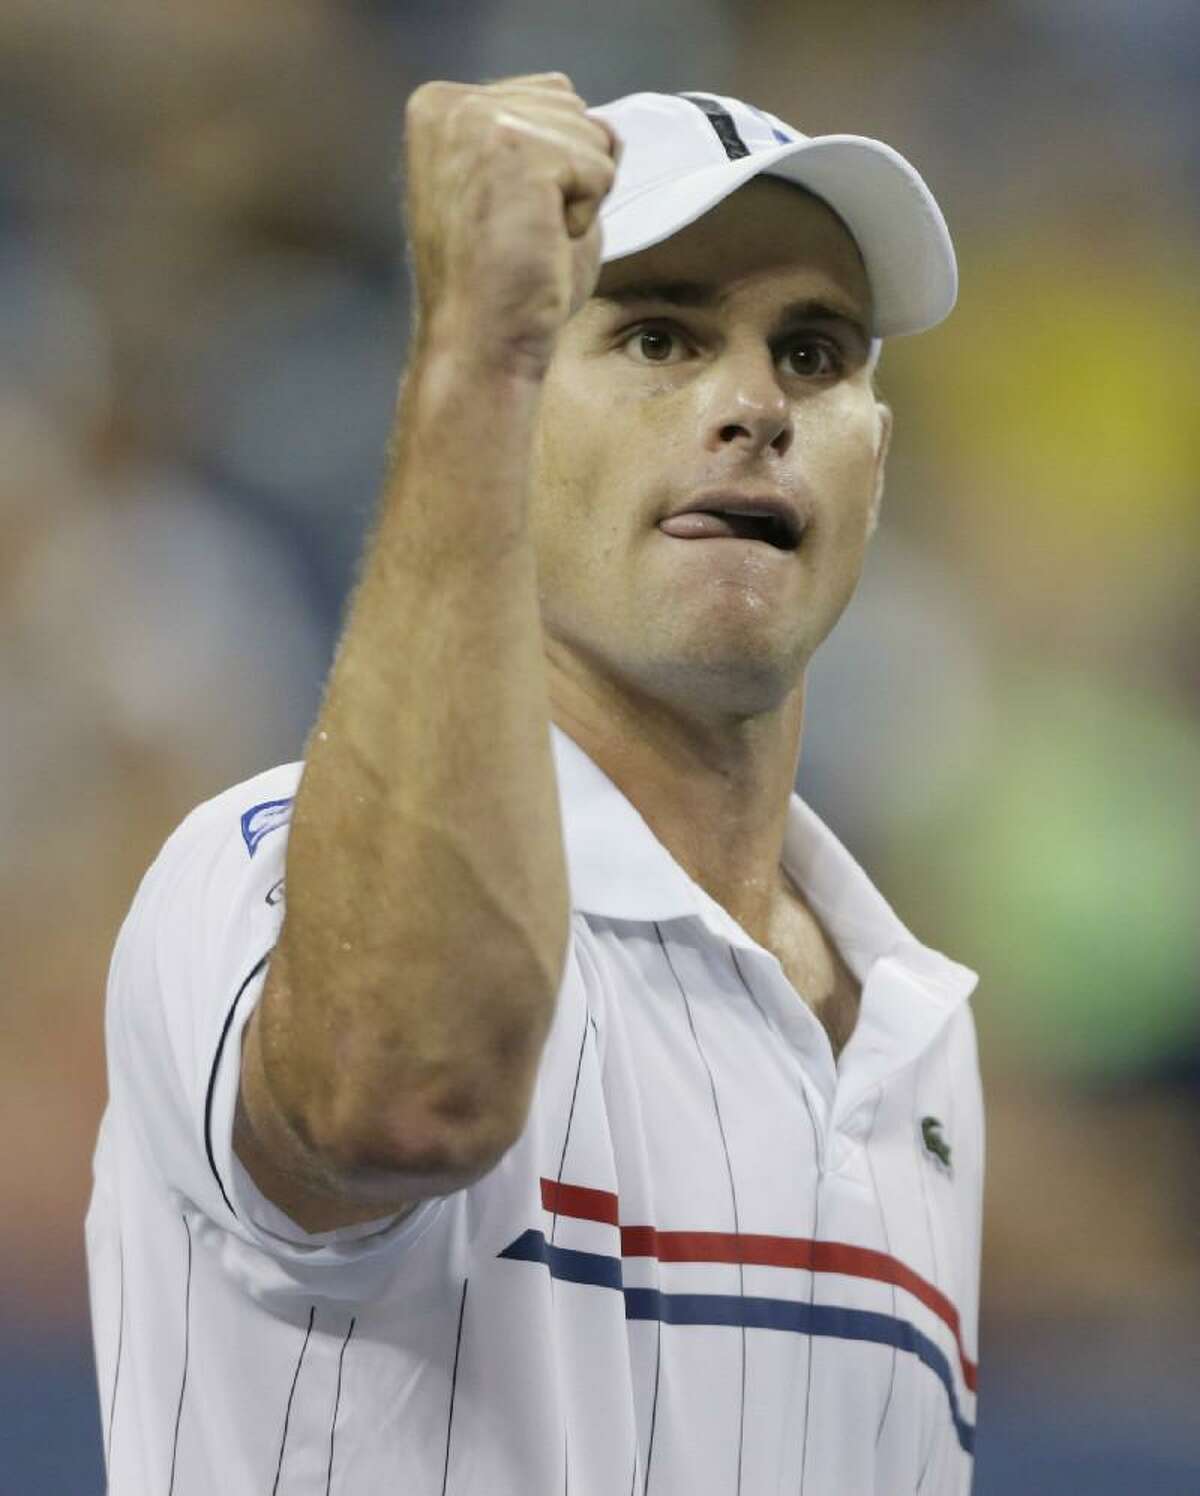 ASSOCIATED PRESS Andy Roddick reacts during his match against Australia's Bernard Tomic in the third round of play at the 2012 US Open tennis tournament on Friday night in New York. Roddick won the match.